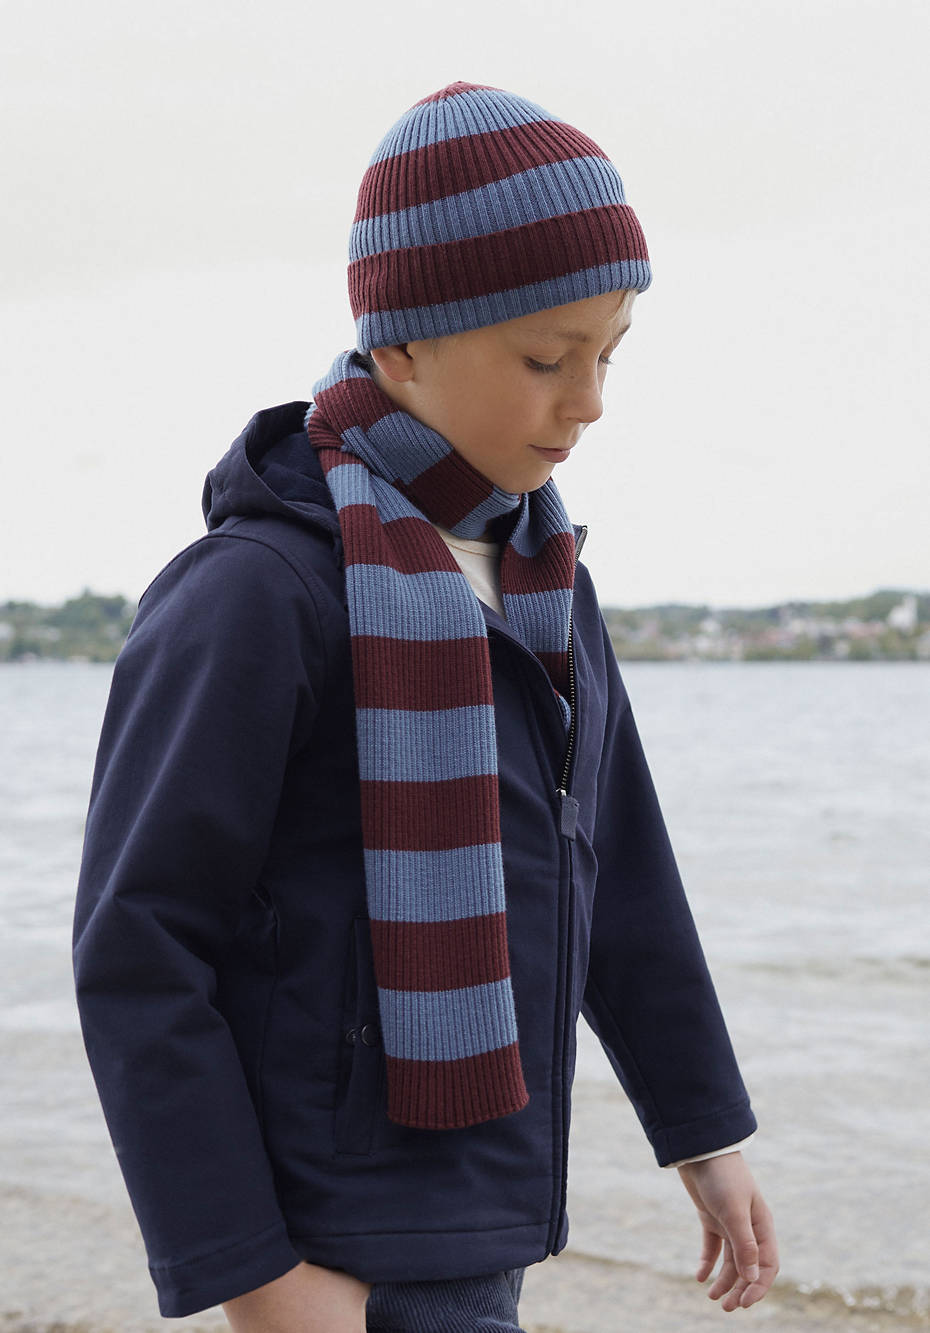 BetterRecycling striped scarf made of pure merino wool